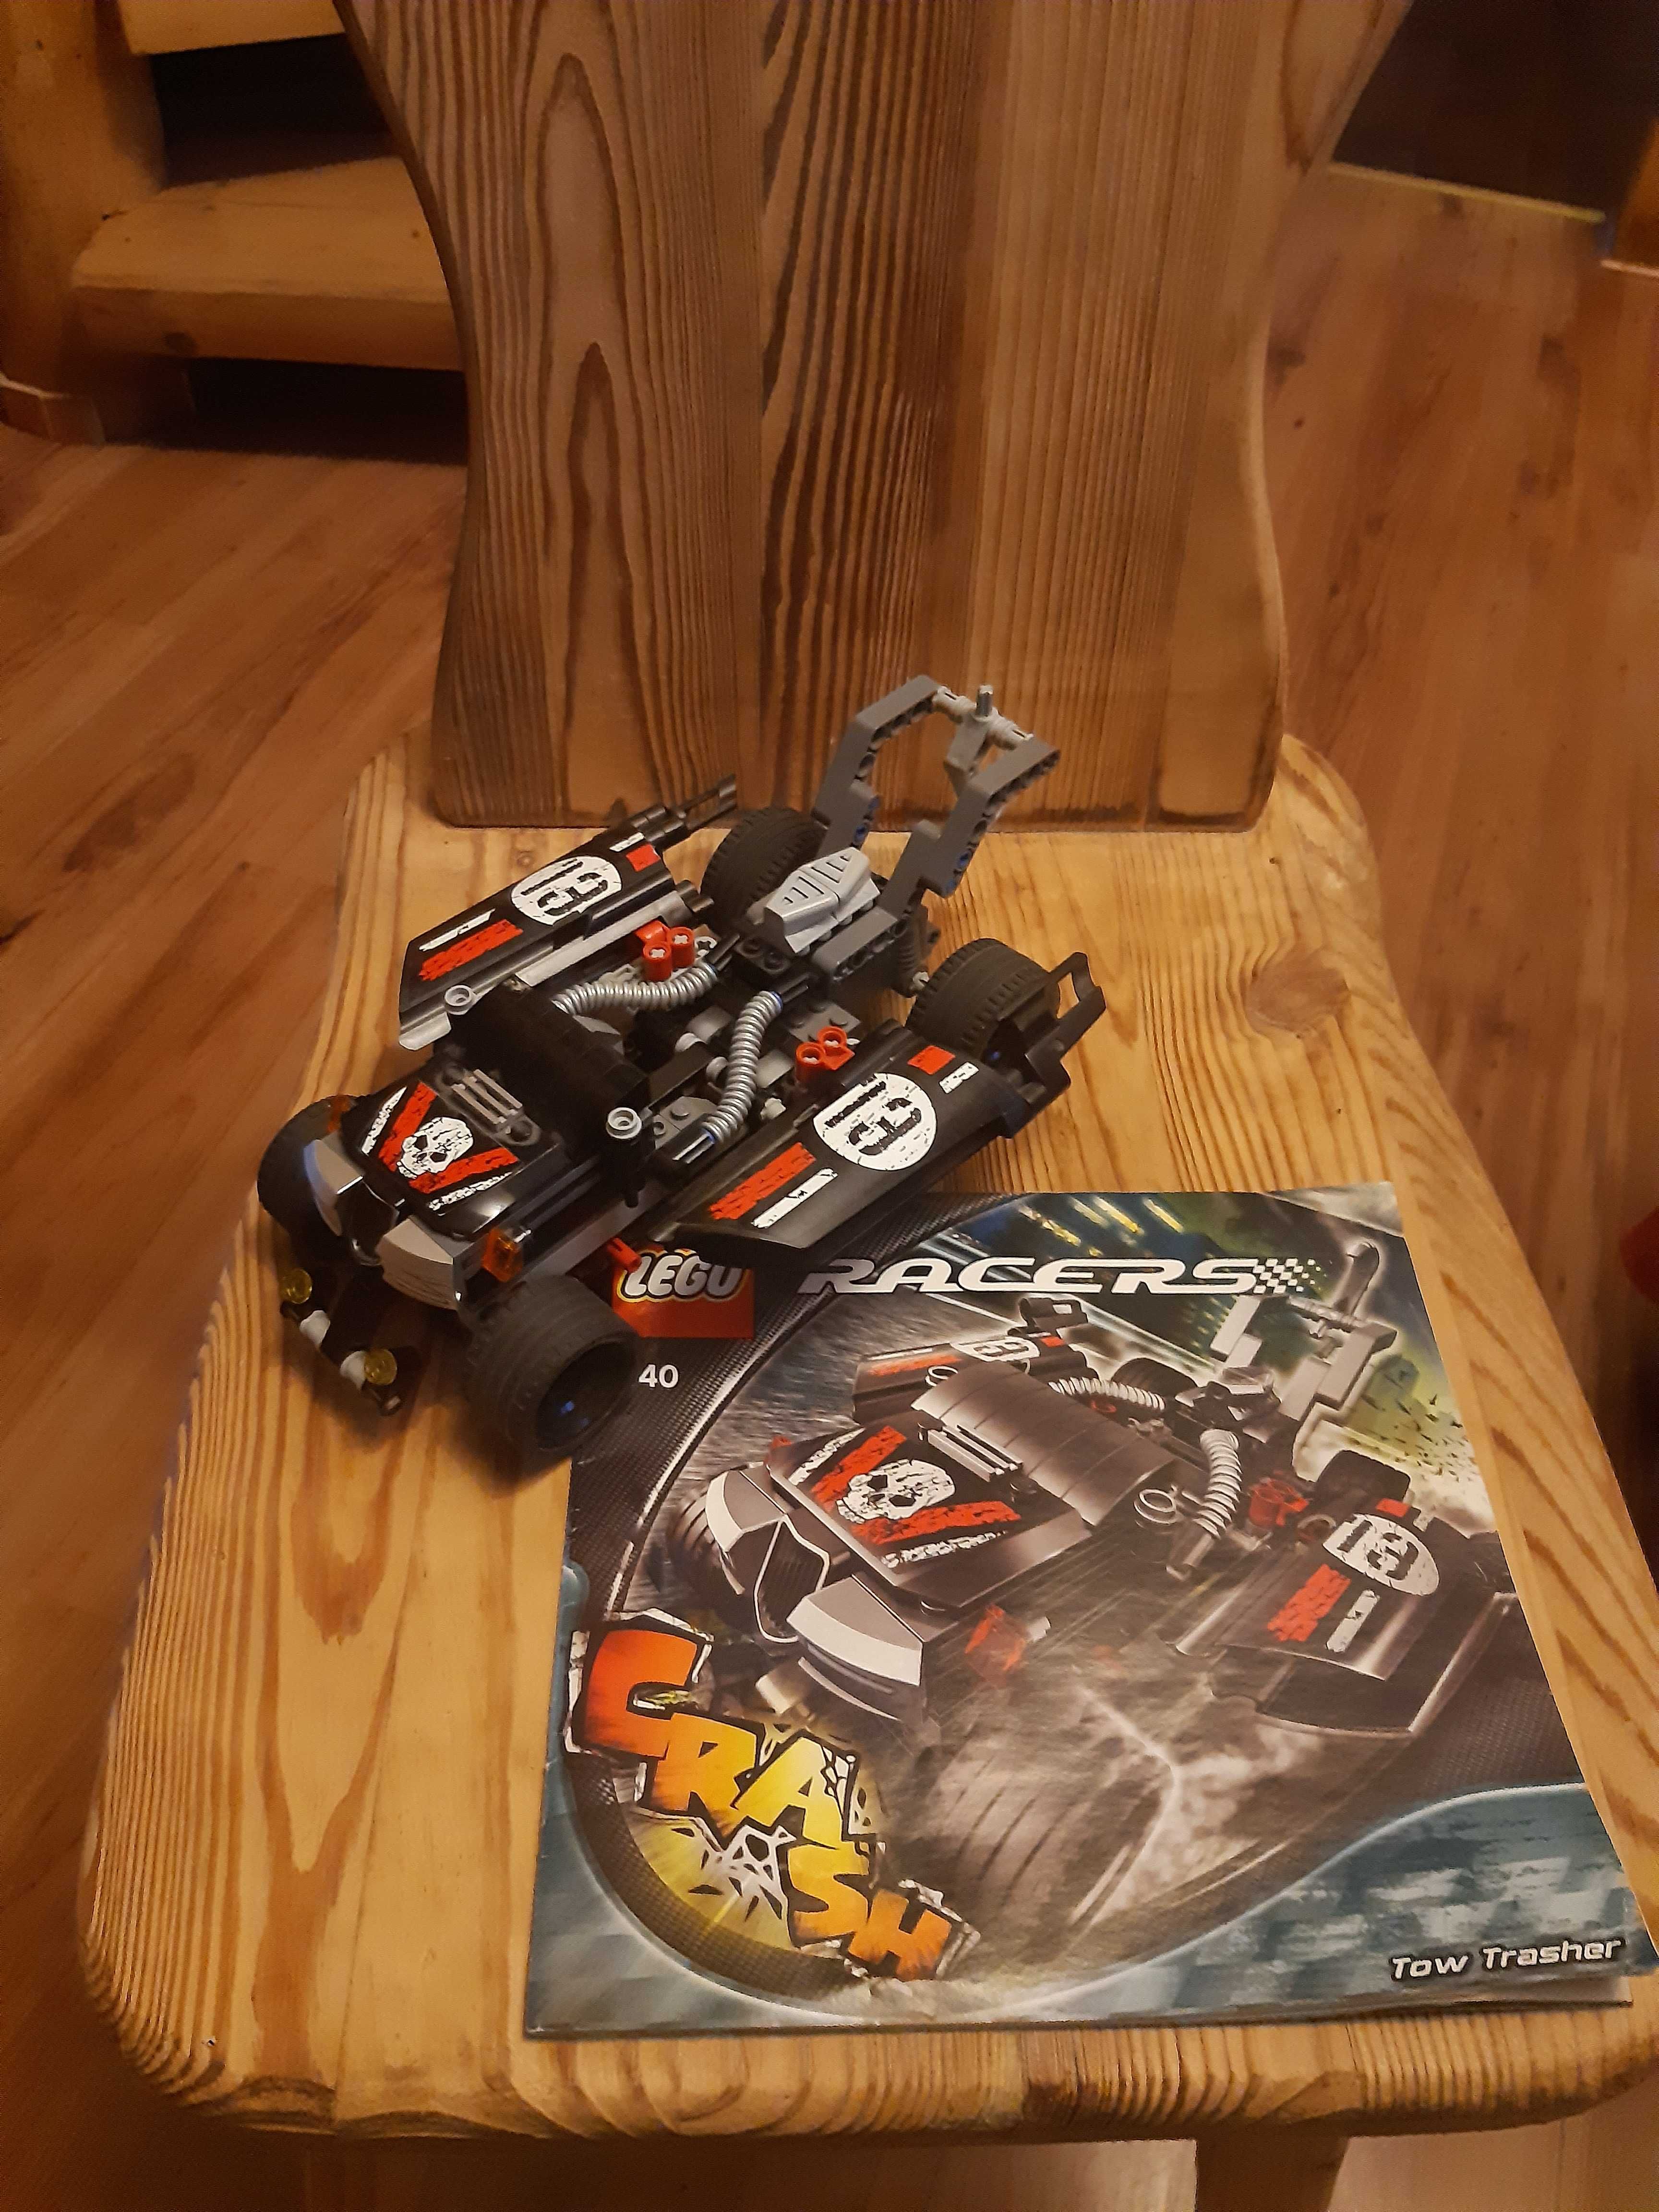 Lego Racers  Tow Trasher (8140)